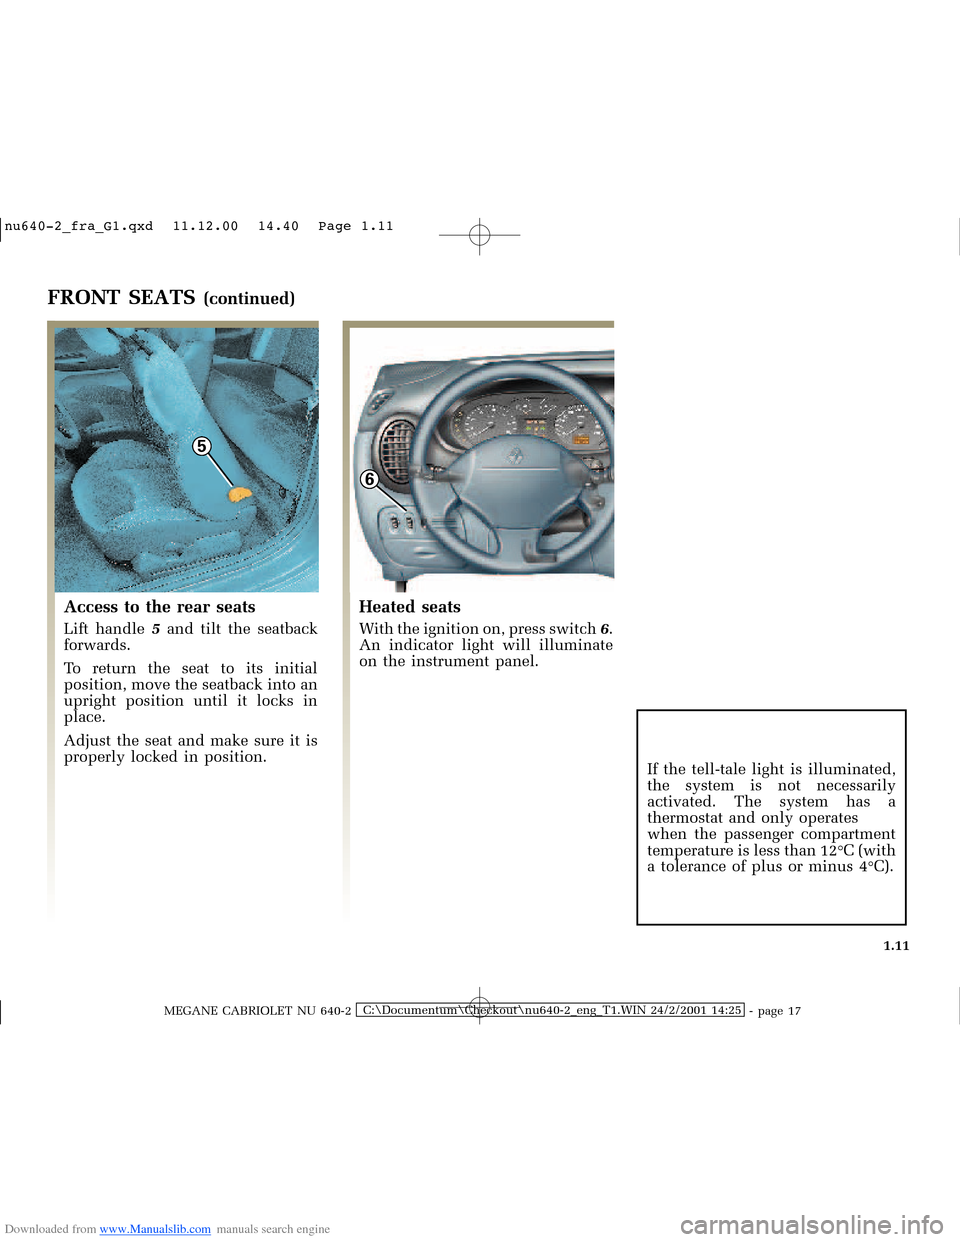 RENAULT MEGANE 2000 X64 / 1.G Owners Manual Downloaded from www.Manualslib.com manuals search engine 5
6
�Q�X������B�I�U�D�B�*���T�[�G� � ��������� � ������ � �3�D�J�H� ����
MEGANE CABRIOLET NU 640-2C:\Documentum\